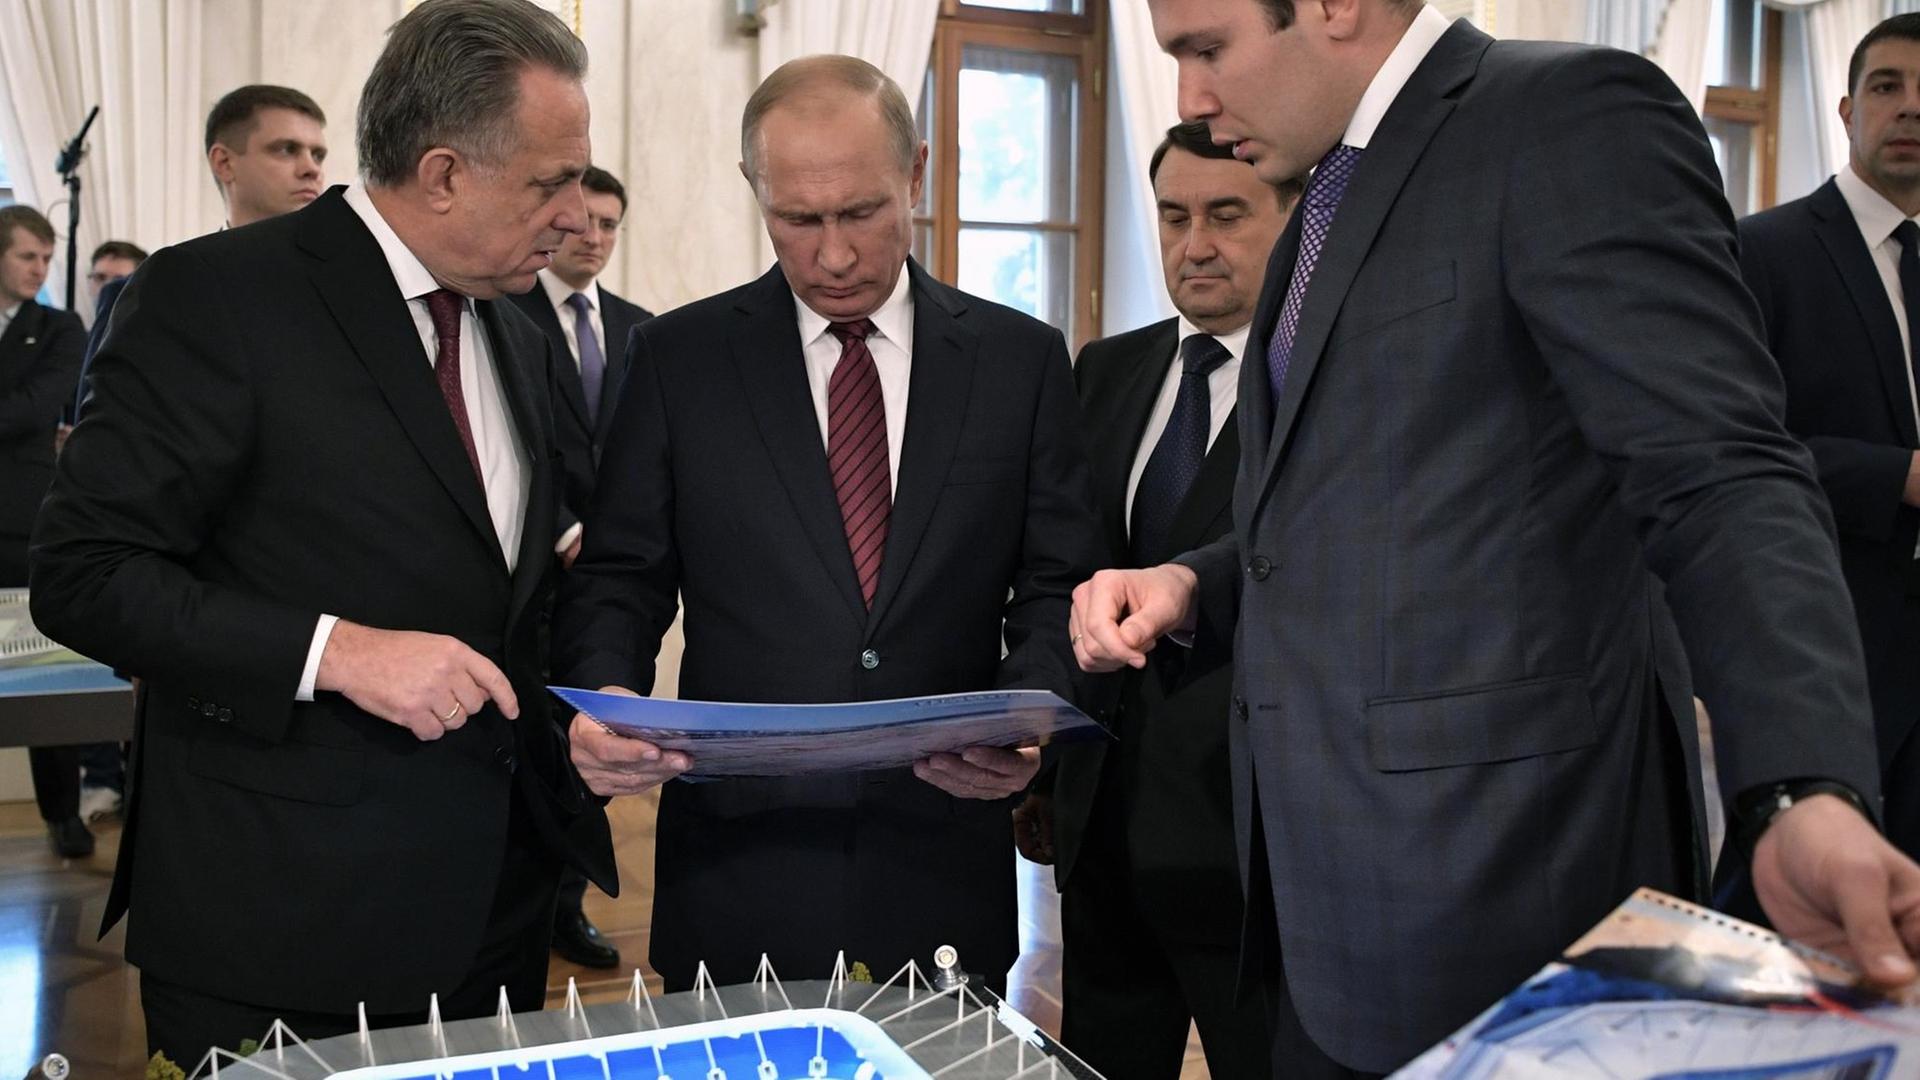 Russian President Vladimir Putin (2nd L), accompanied by deputy prime minister Vitaly Mutko (L), visits an exhibition devoted to the preparation for the 2018 FIFA World Cup at the Kremlin in Moscow on October 3, 2017. / AFP PHOTO / SPUTNIK / Alexey NIKOLSKY